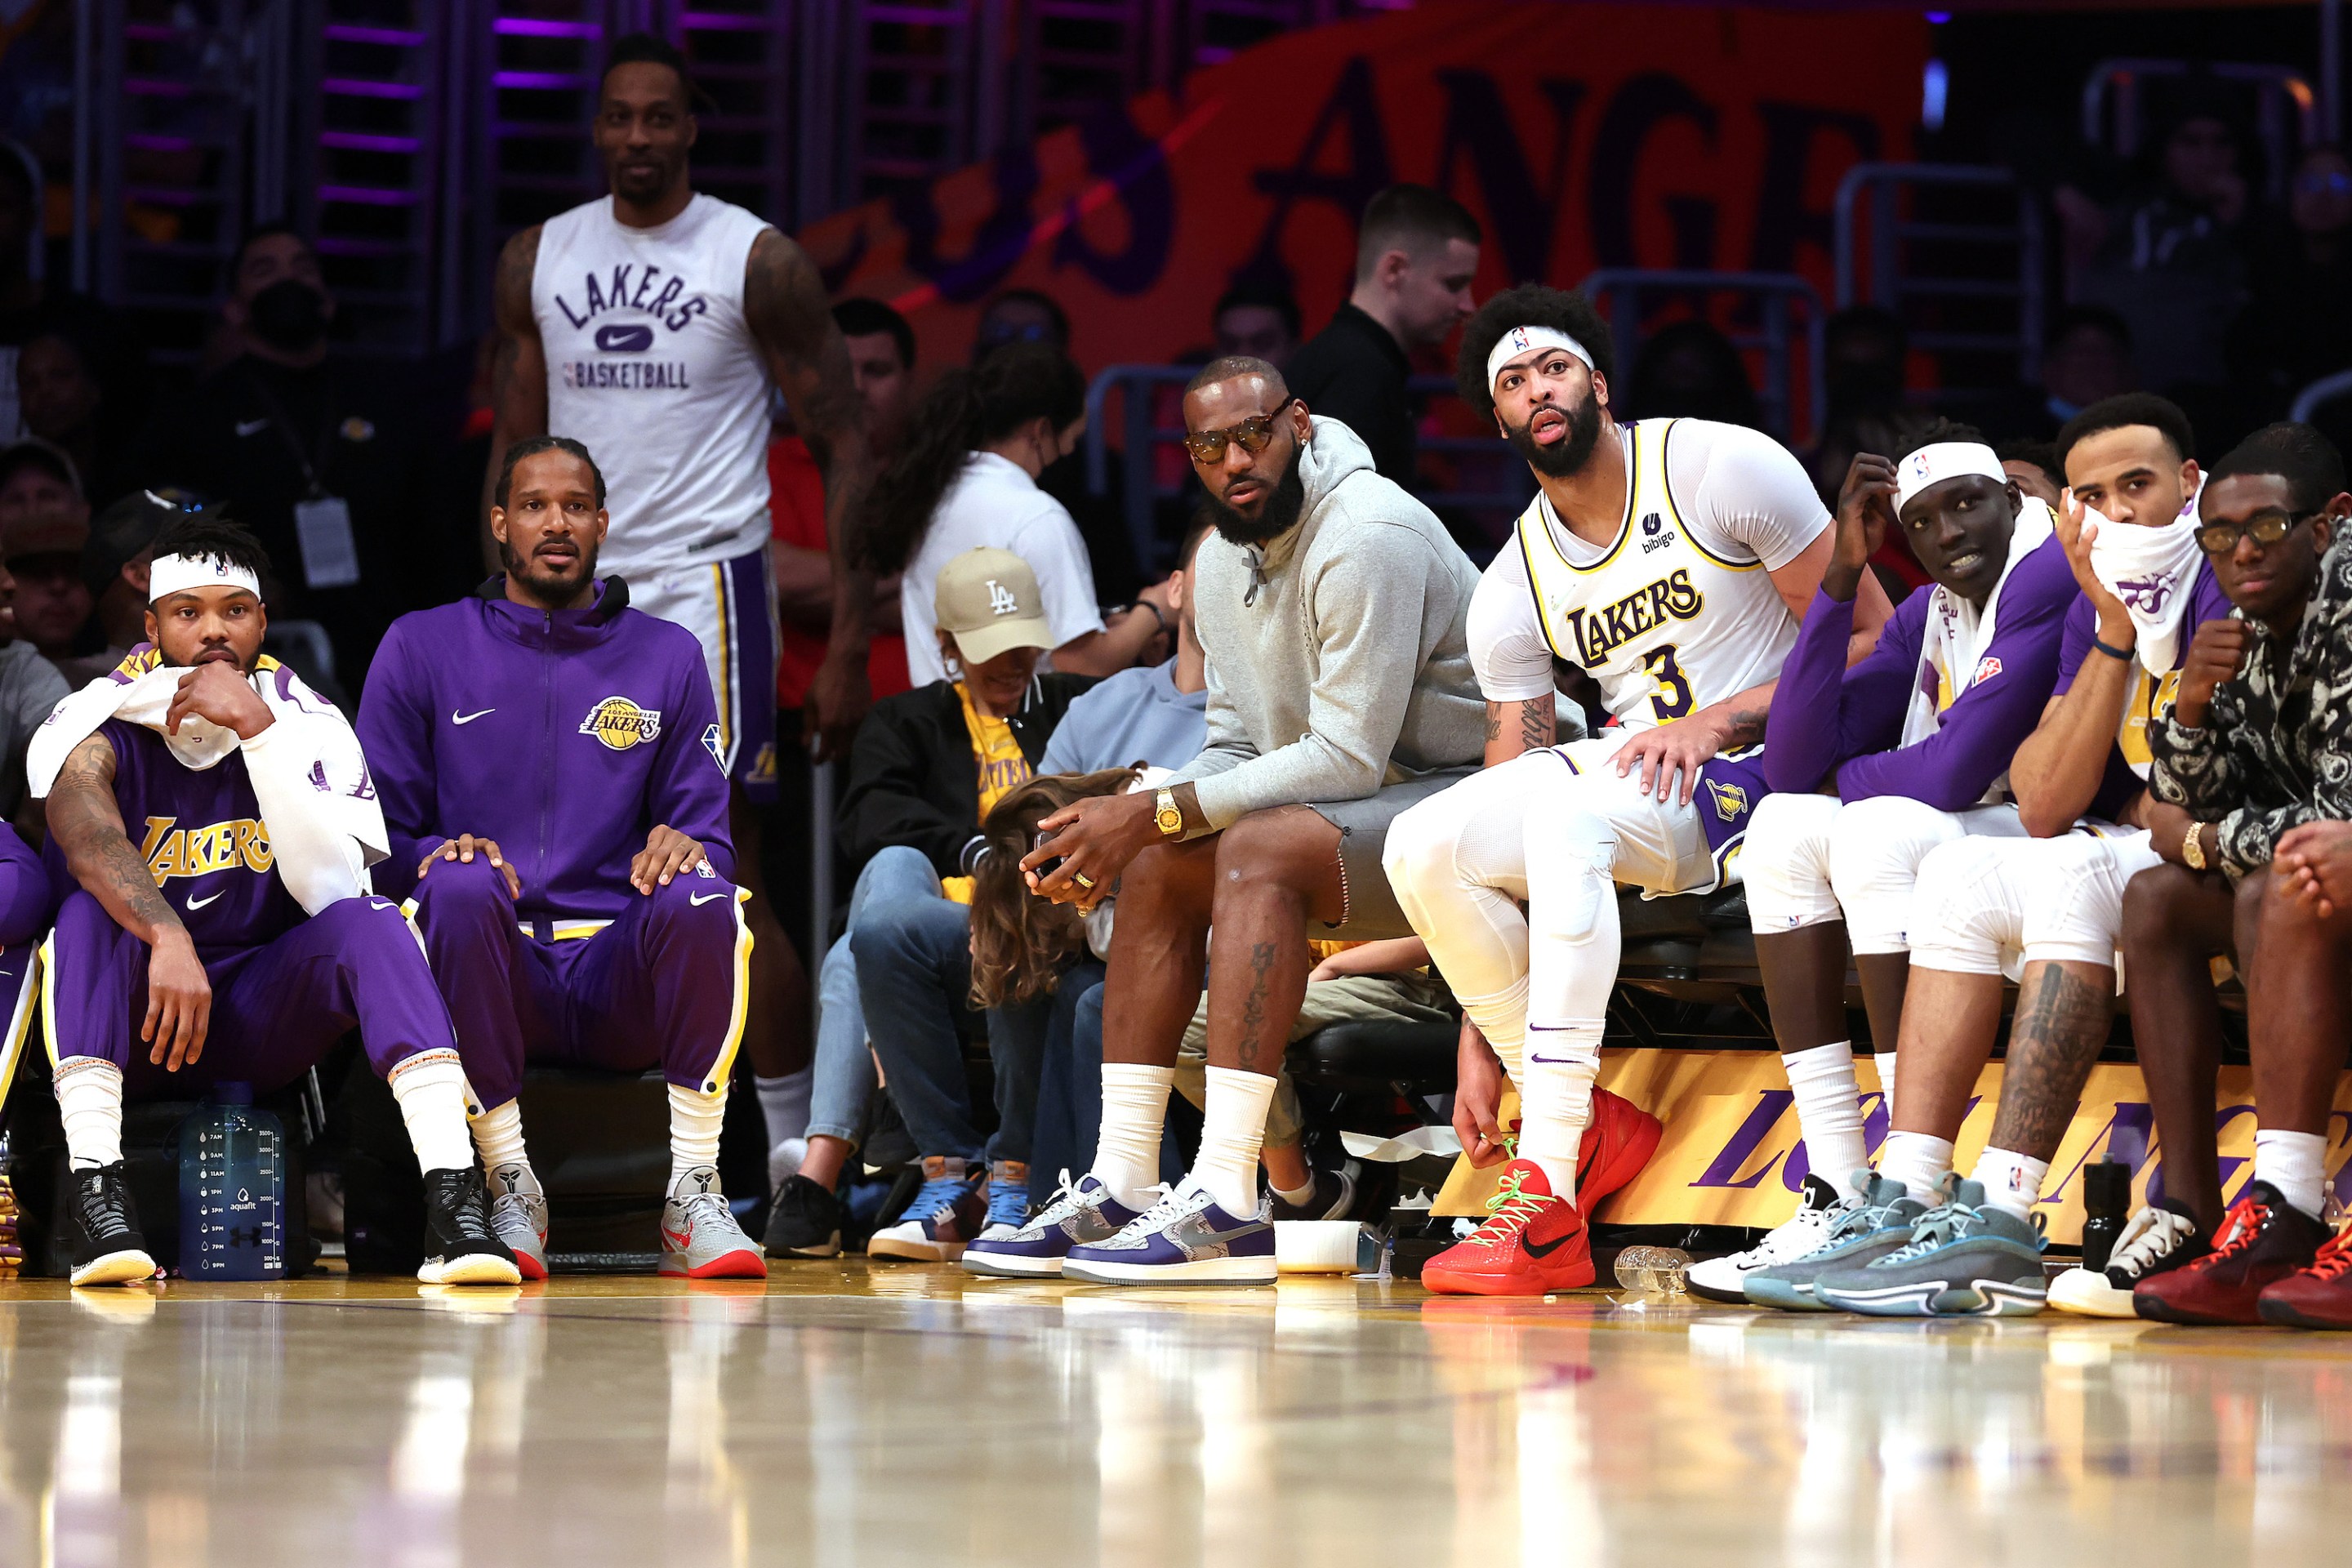 LeBron James #6 and Anthony Davis #3 of the Los Angeles Lakers look on from the bench during the second half of a game against the Denver Nuggets at Crypto.com Arena on April 03, 2022 in Los Angeles, California.